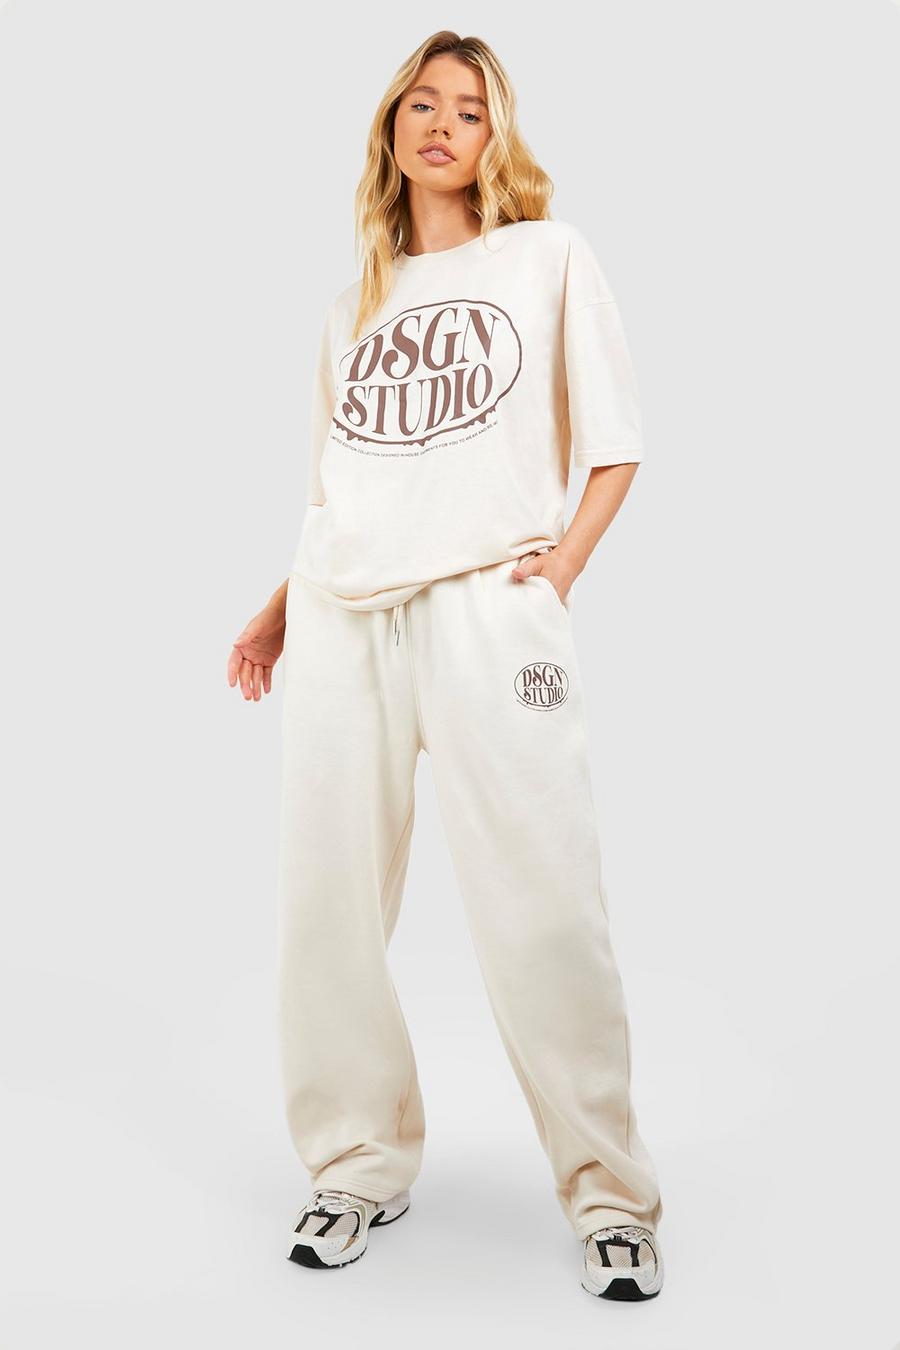 Stone Dsgn Studio Graphic T-Shirt And Jogger Set image number 1